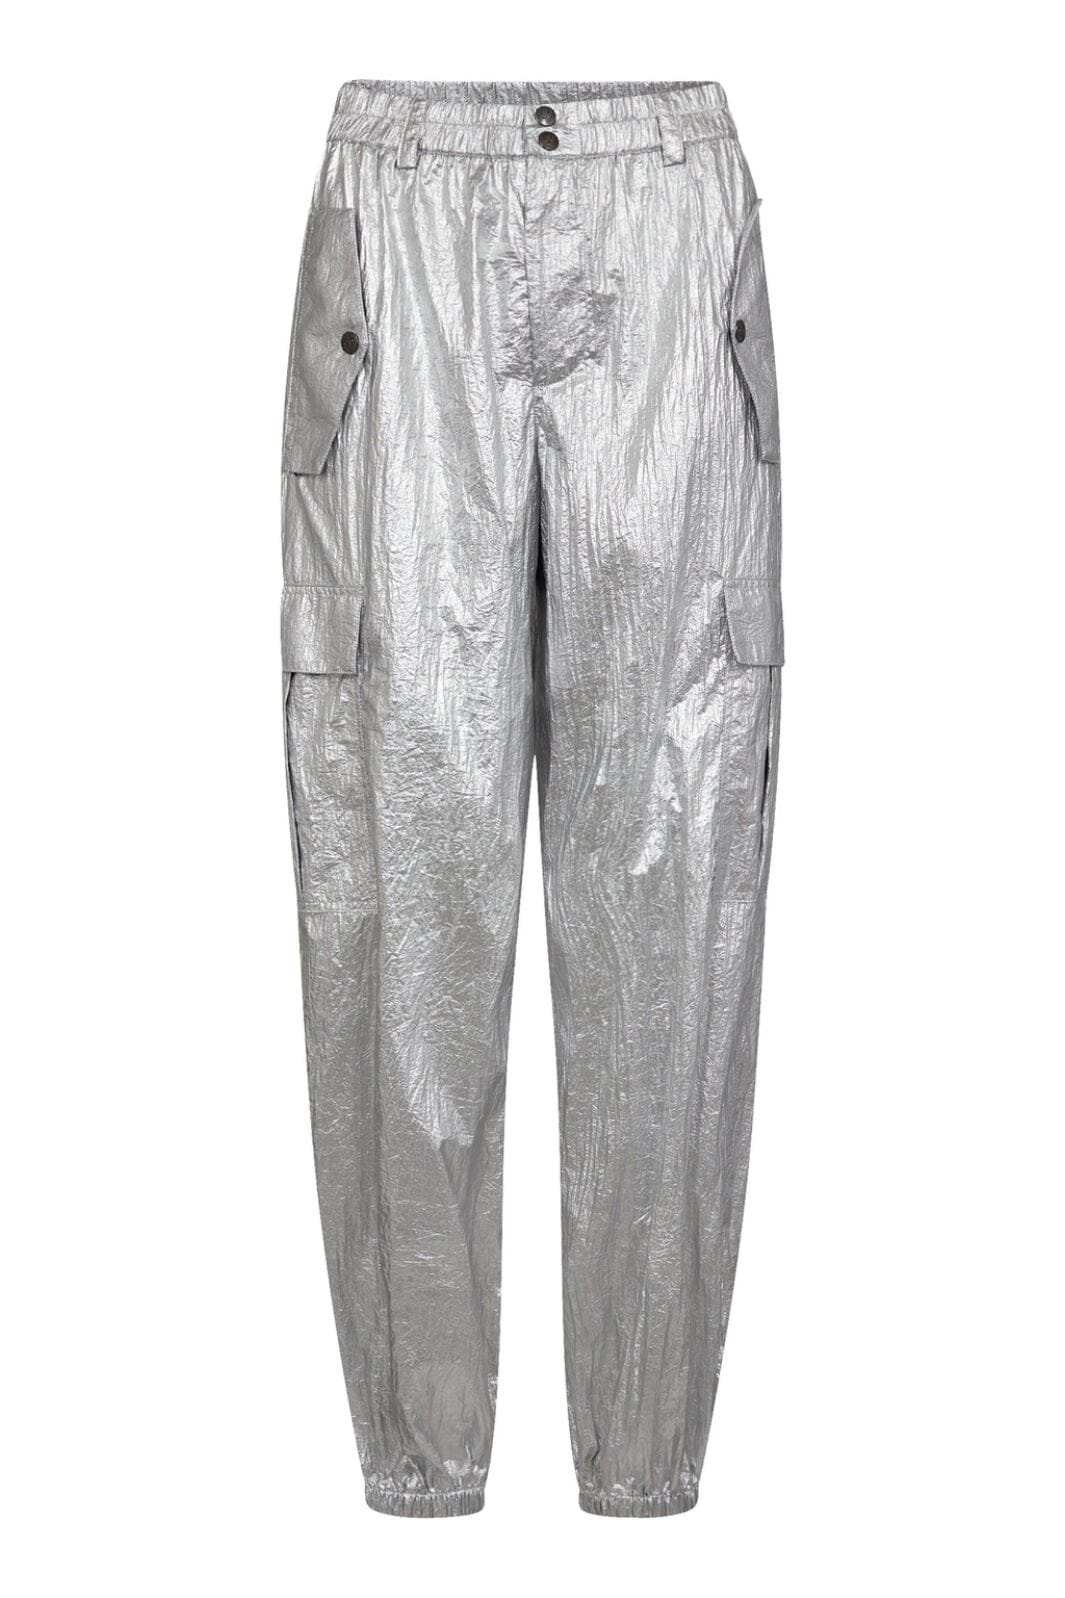 Co´couture - Metalcc Cargo Long Pant 31196 - 930 Silver Bukser 